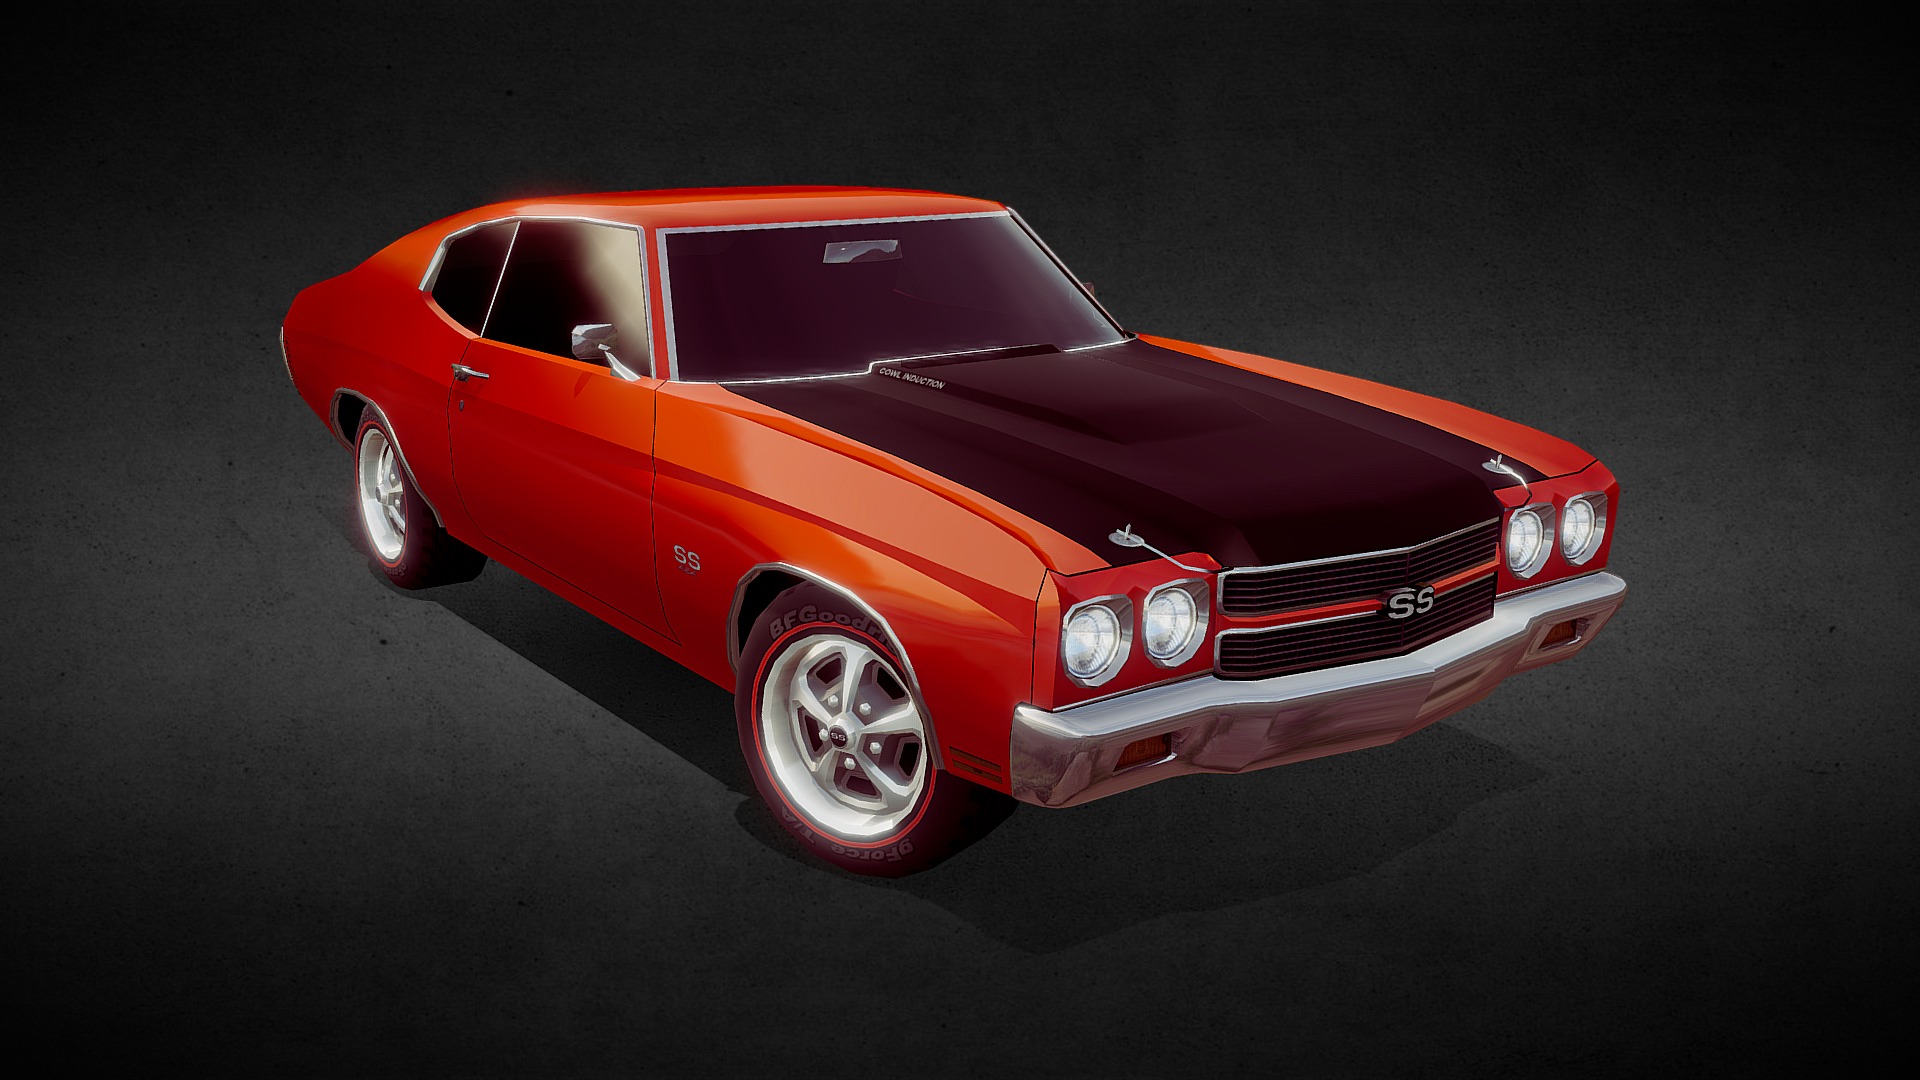 3D model 1970 Chevrolet Chevelle SS - This is a 3D model of the 1970 Chevrolet Chevelle SS. The 3D model is about a red car parked.